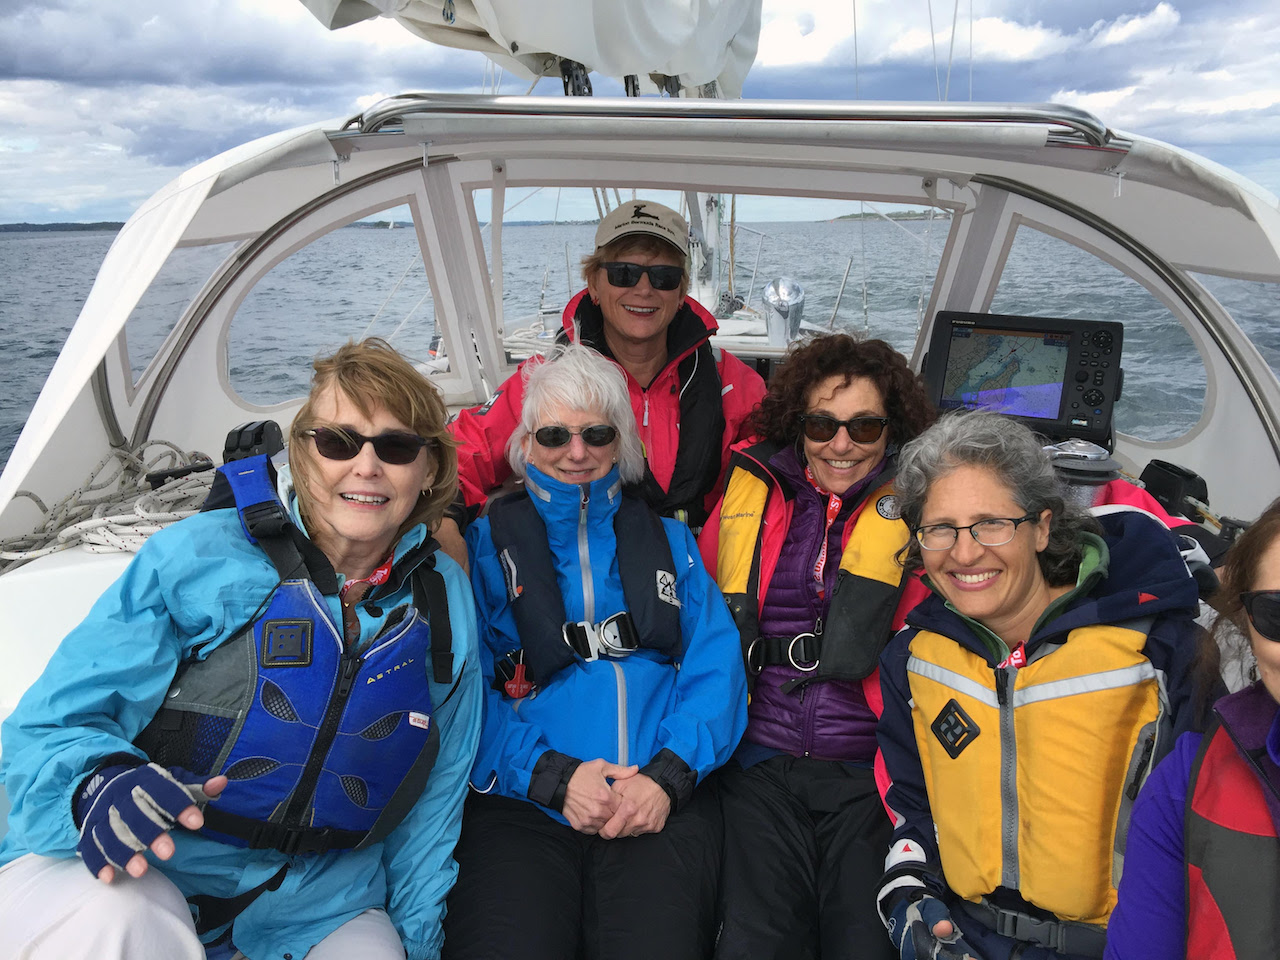 WindCheck Magazine NWSA Women's Sailing Conference Comes to Marblehead